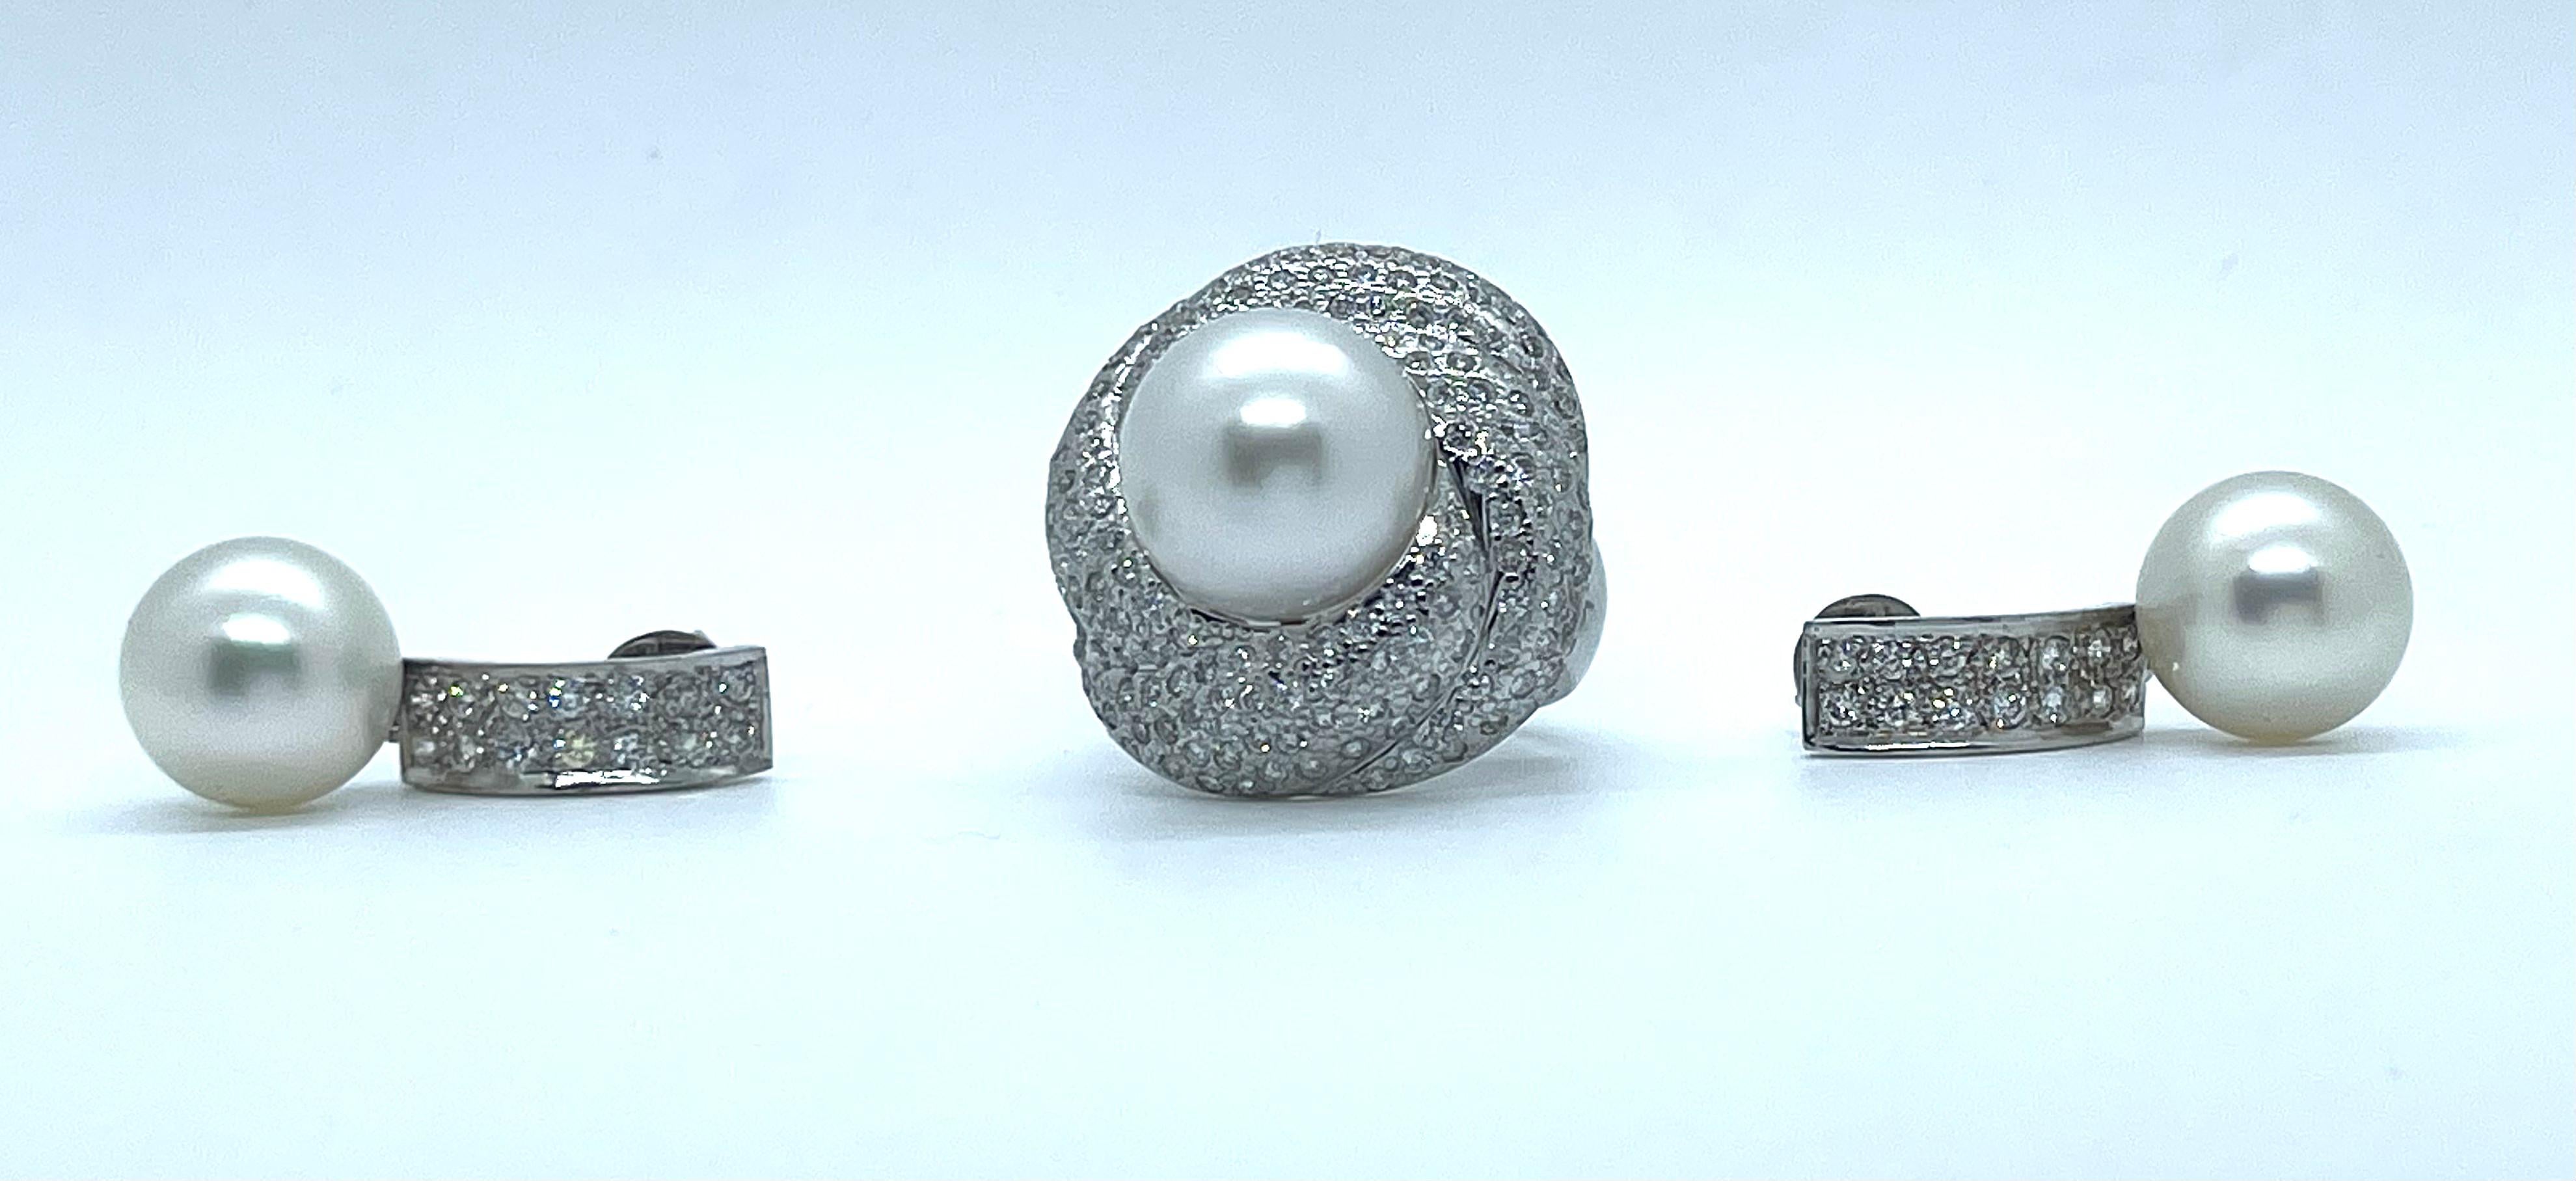 A beautiful set composed of the ring and the earrings with Australian South Sea Pearls and diamonds in 18K white gold. the earrings have two Pearles 8 carats each one and paved with 28 diamonds with an approximate weight 0.8 carats. The